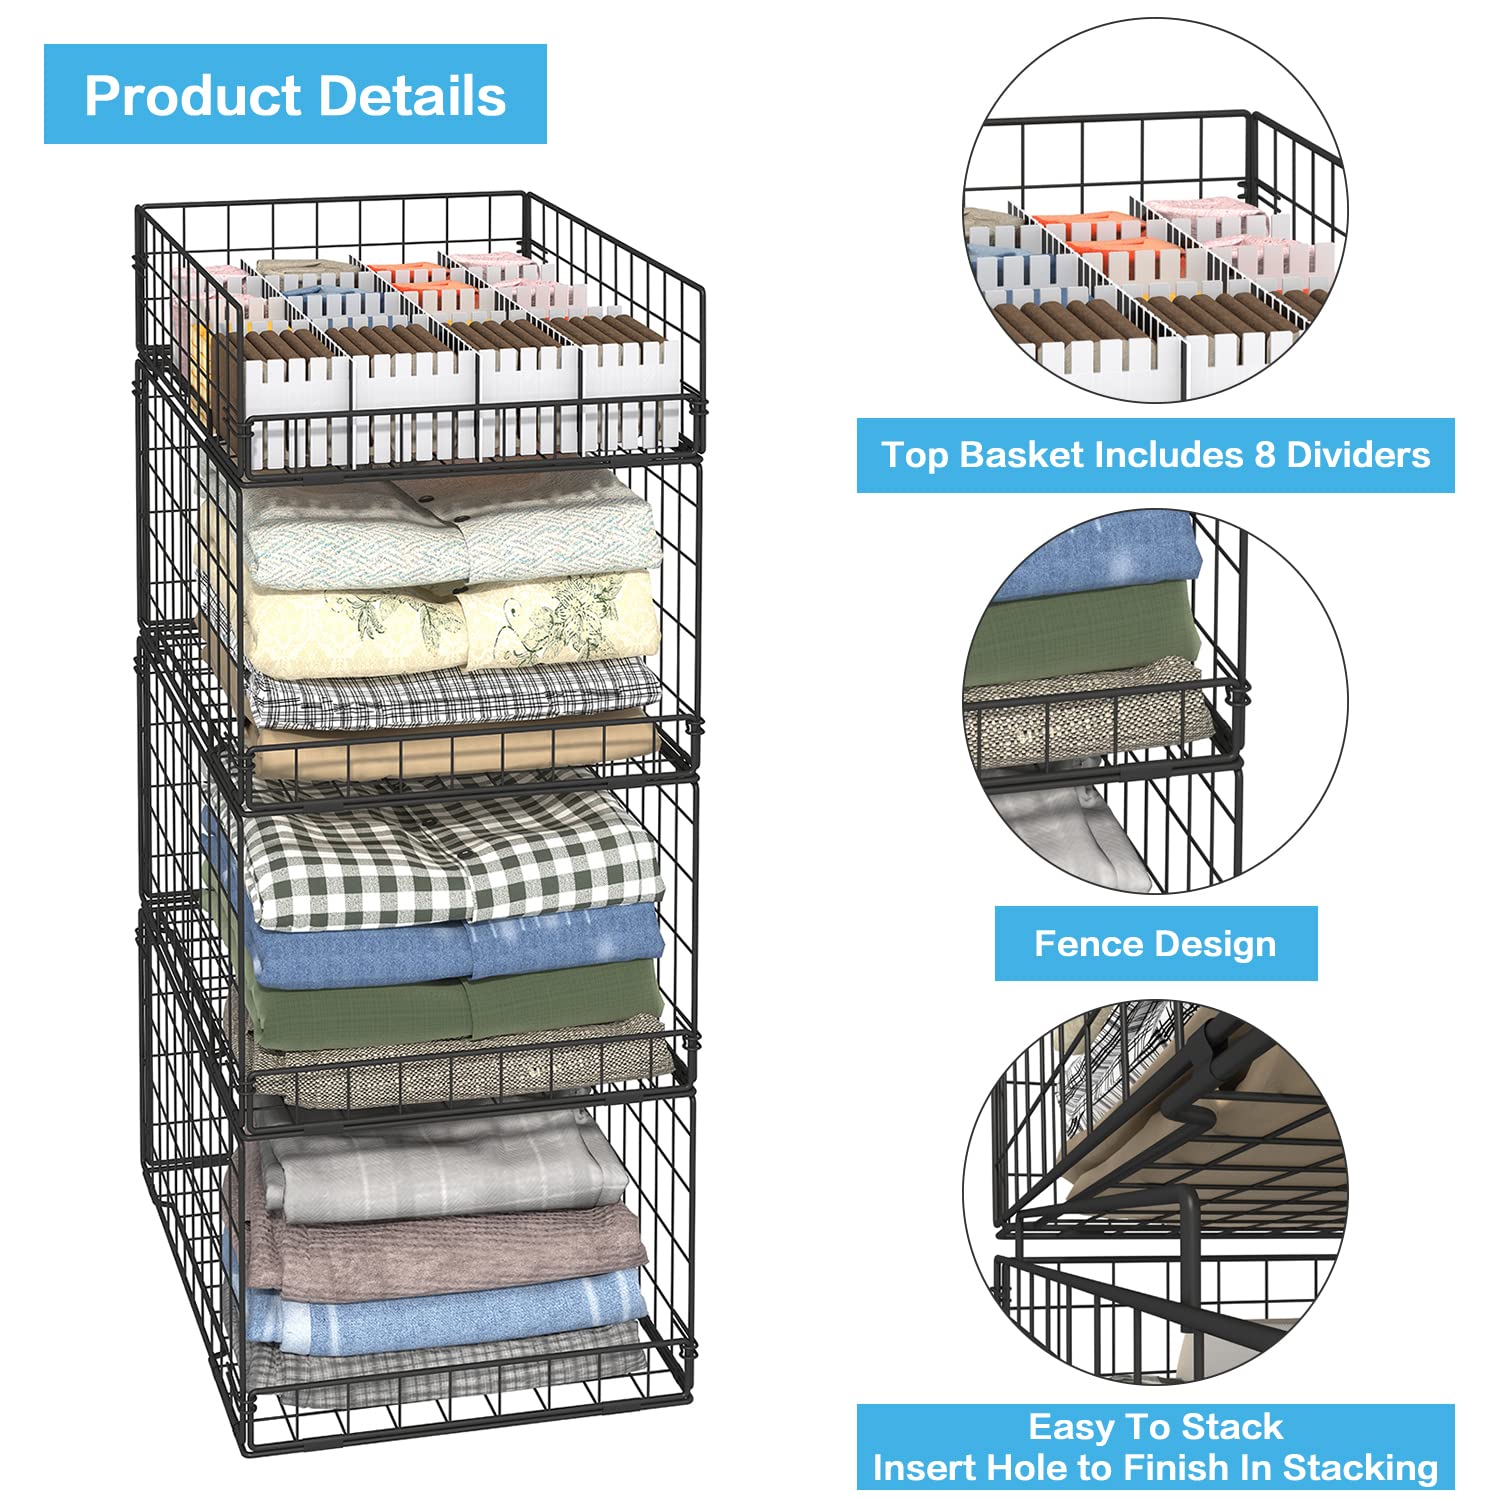 4 Tier Closet Organizers and Storage Shelves for Clothes,4 Pack Stackable Storage Bins Metal Wire Organizer Baskets Containers Drawers with Dividers for Truck Camper RV Closet/Pantries/Wardrobe